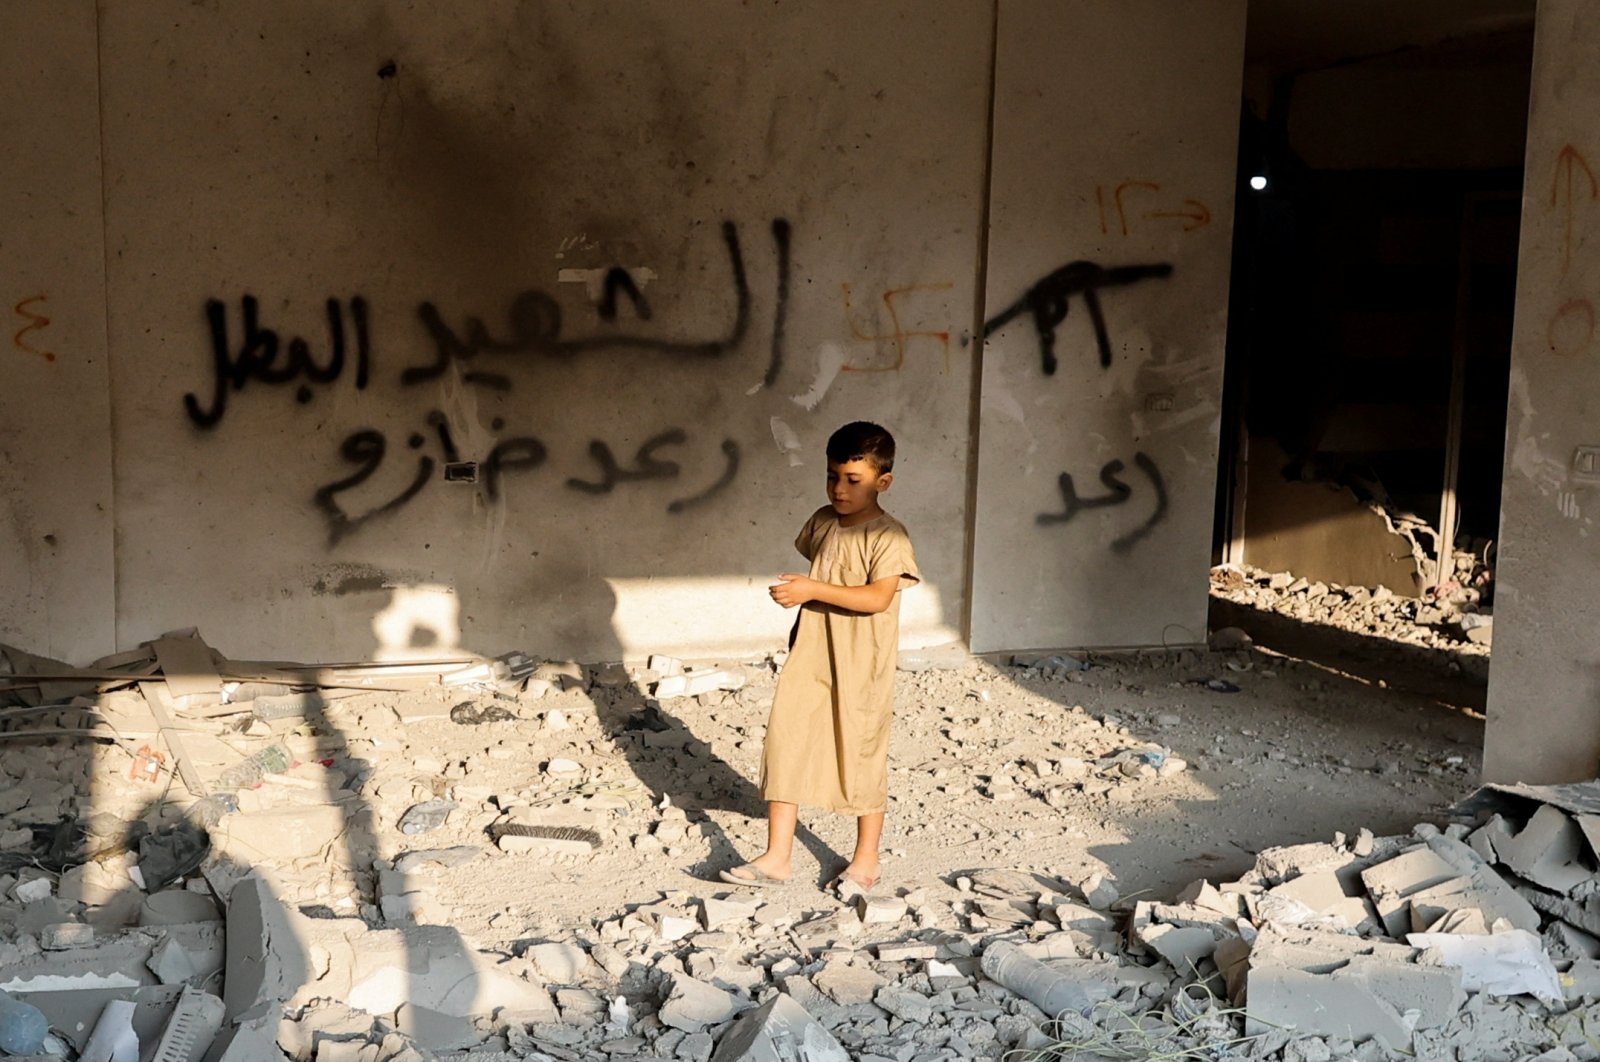 A Palestinian boy walks in the house of Raed Hazem after it was demolished by Israeli forces in Jenin, in the Israeli-occupied West Bank, Palestine, Sept. 6, 2022. (Reuters Photo)